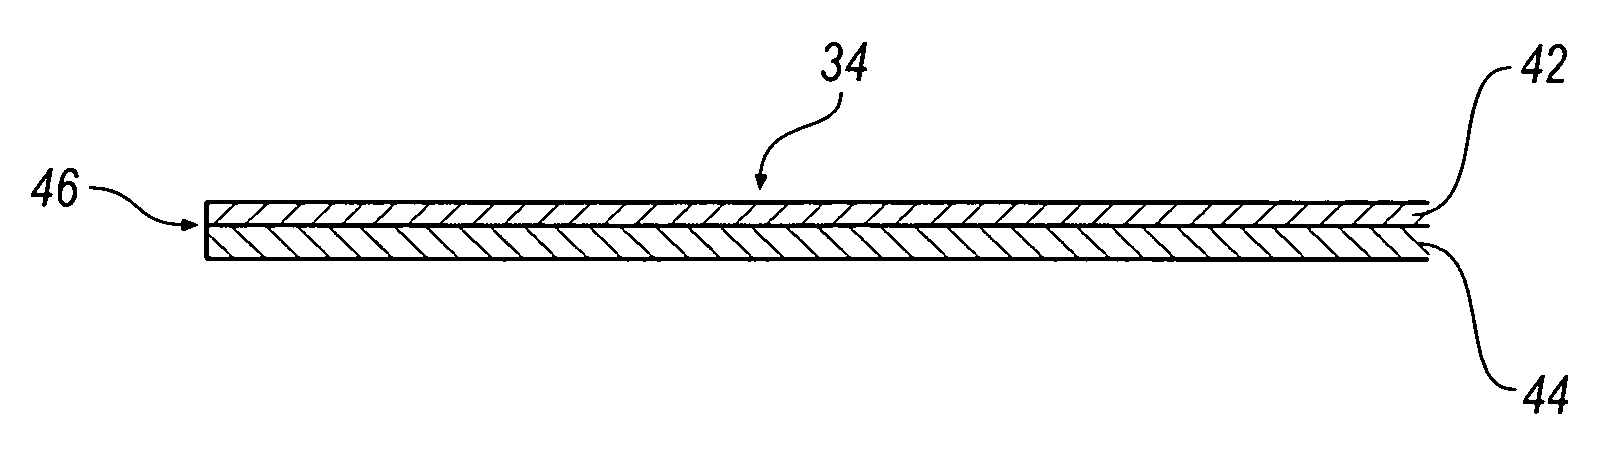 Sandwich panel and method of manufacturing same